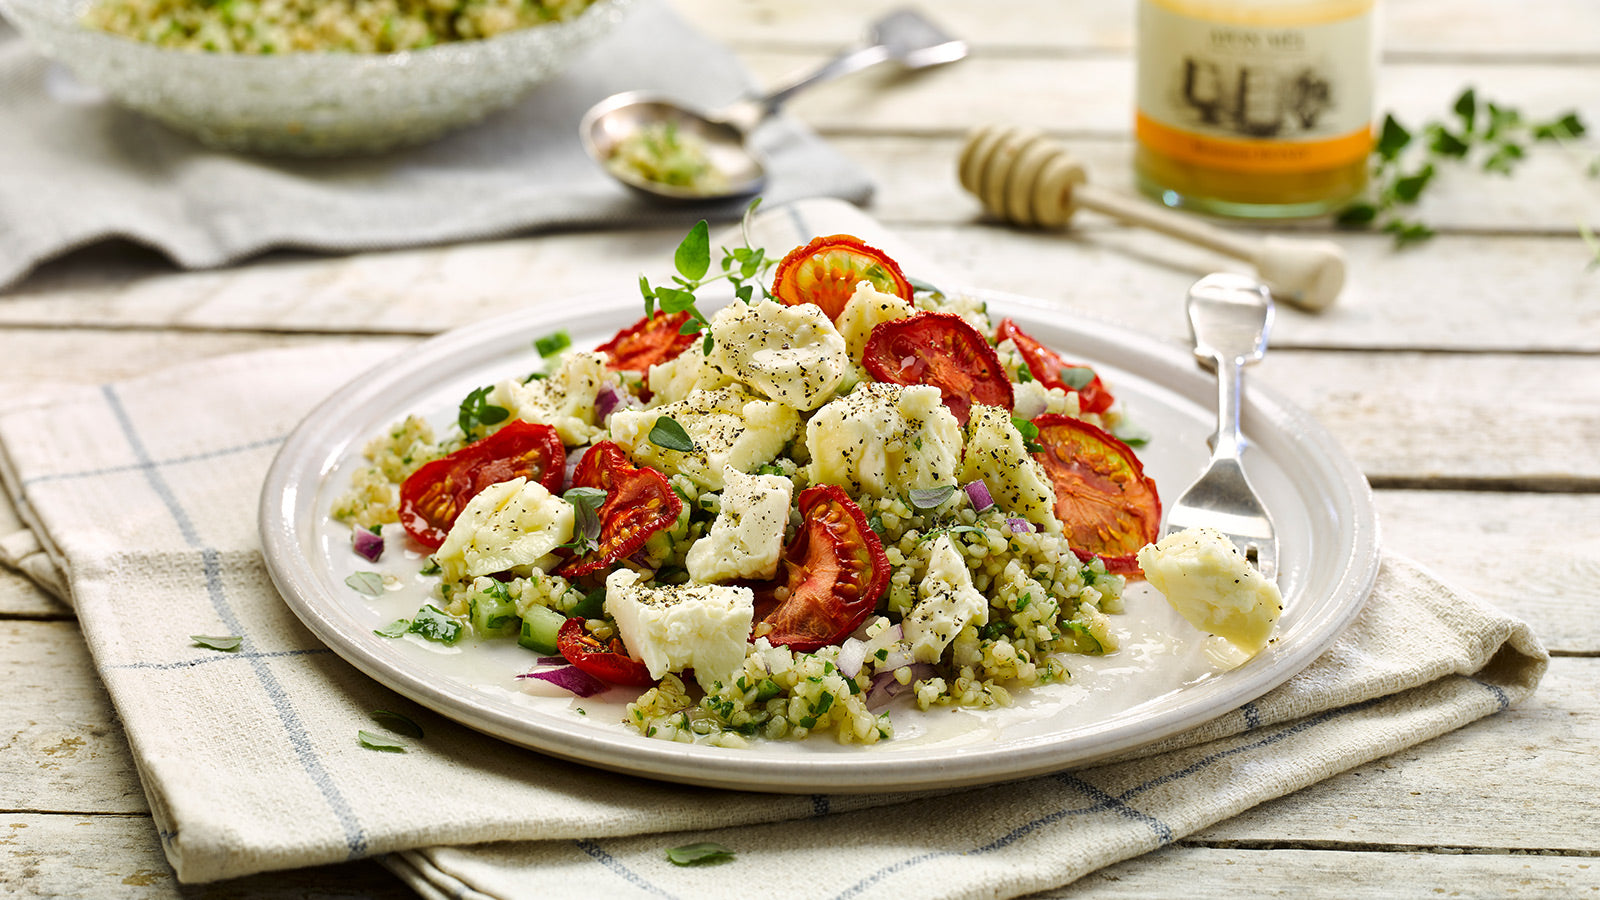 Green Tabbouleh Salad - Crumbled Thelma's Original Traditional Welsh Caerffili Cheese (PGI) with Honey & Thyme